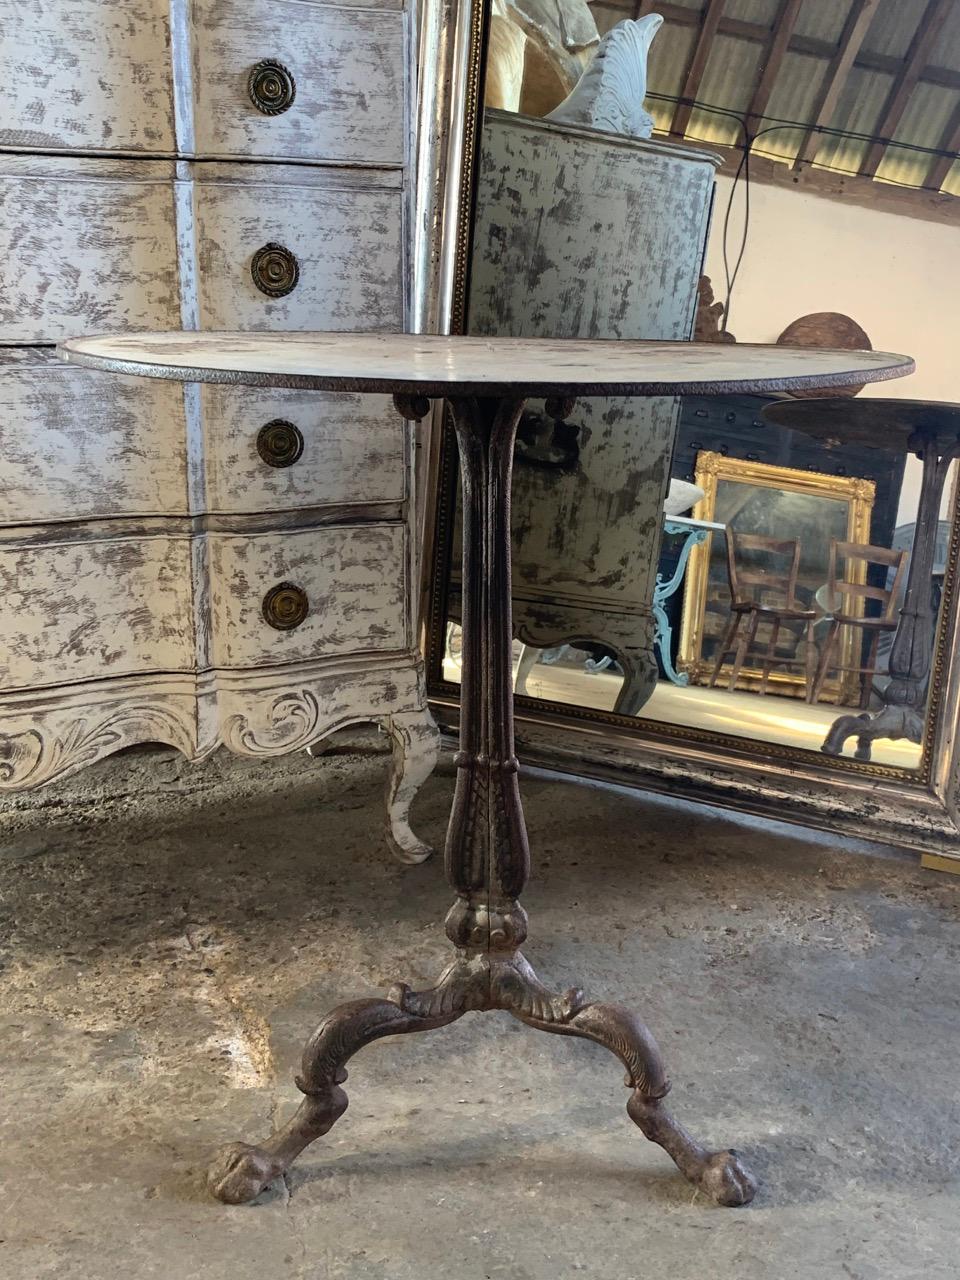 A beautiful quality and rare 19th century bistro table from France. Made from heavy cast iron with an original enamel top. Supported on 3 beautiful Lion shaped legs.